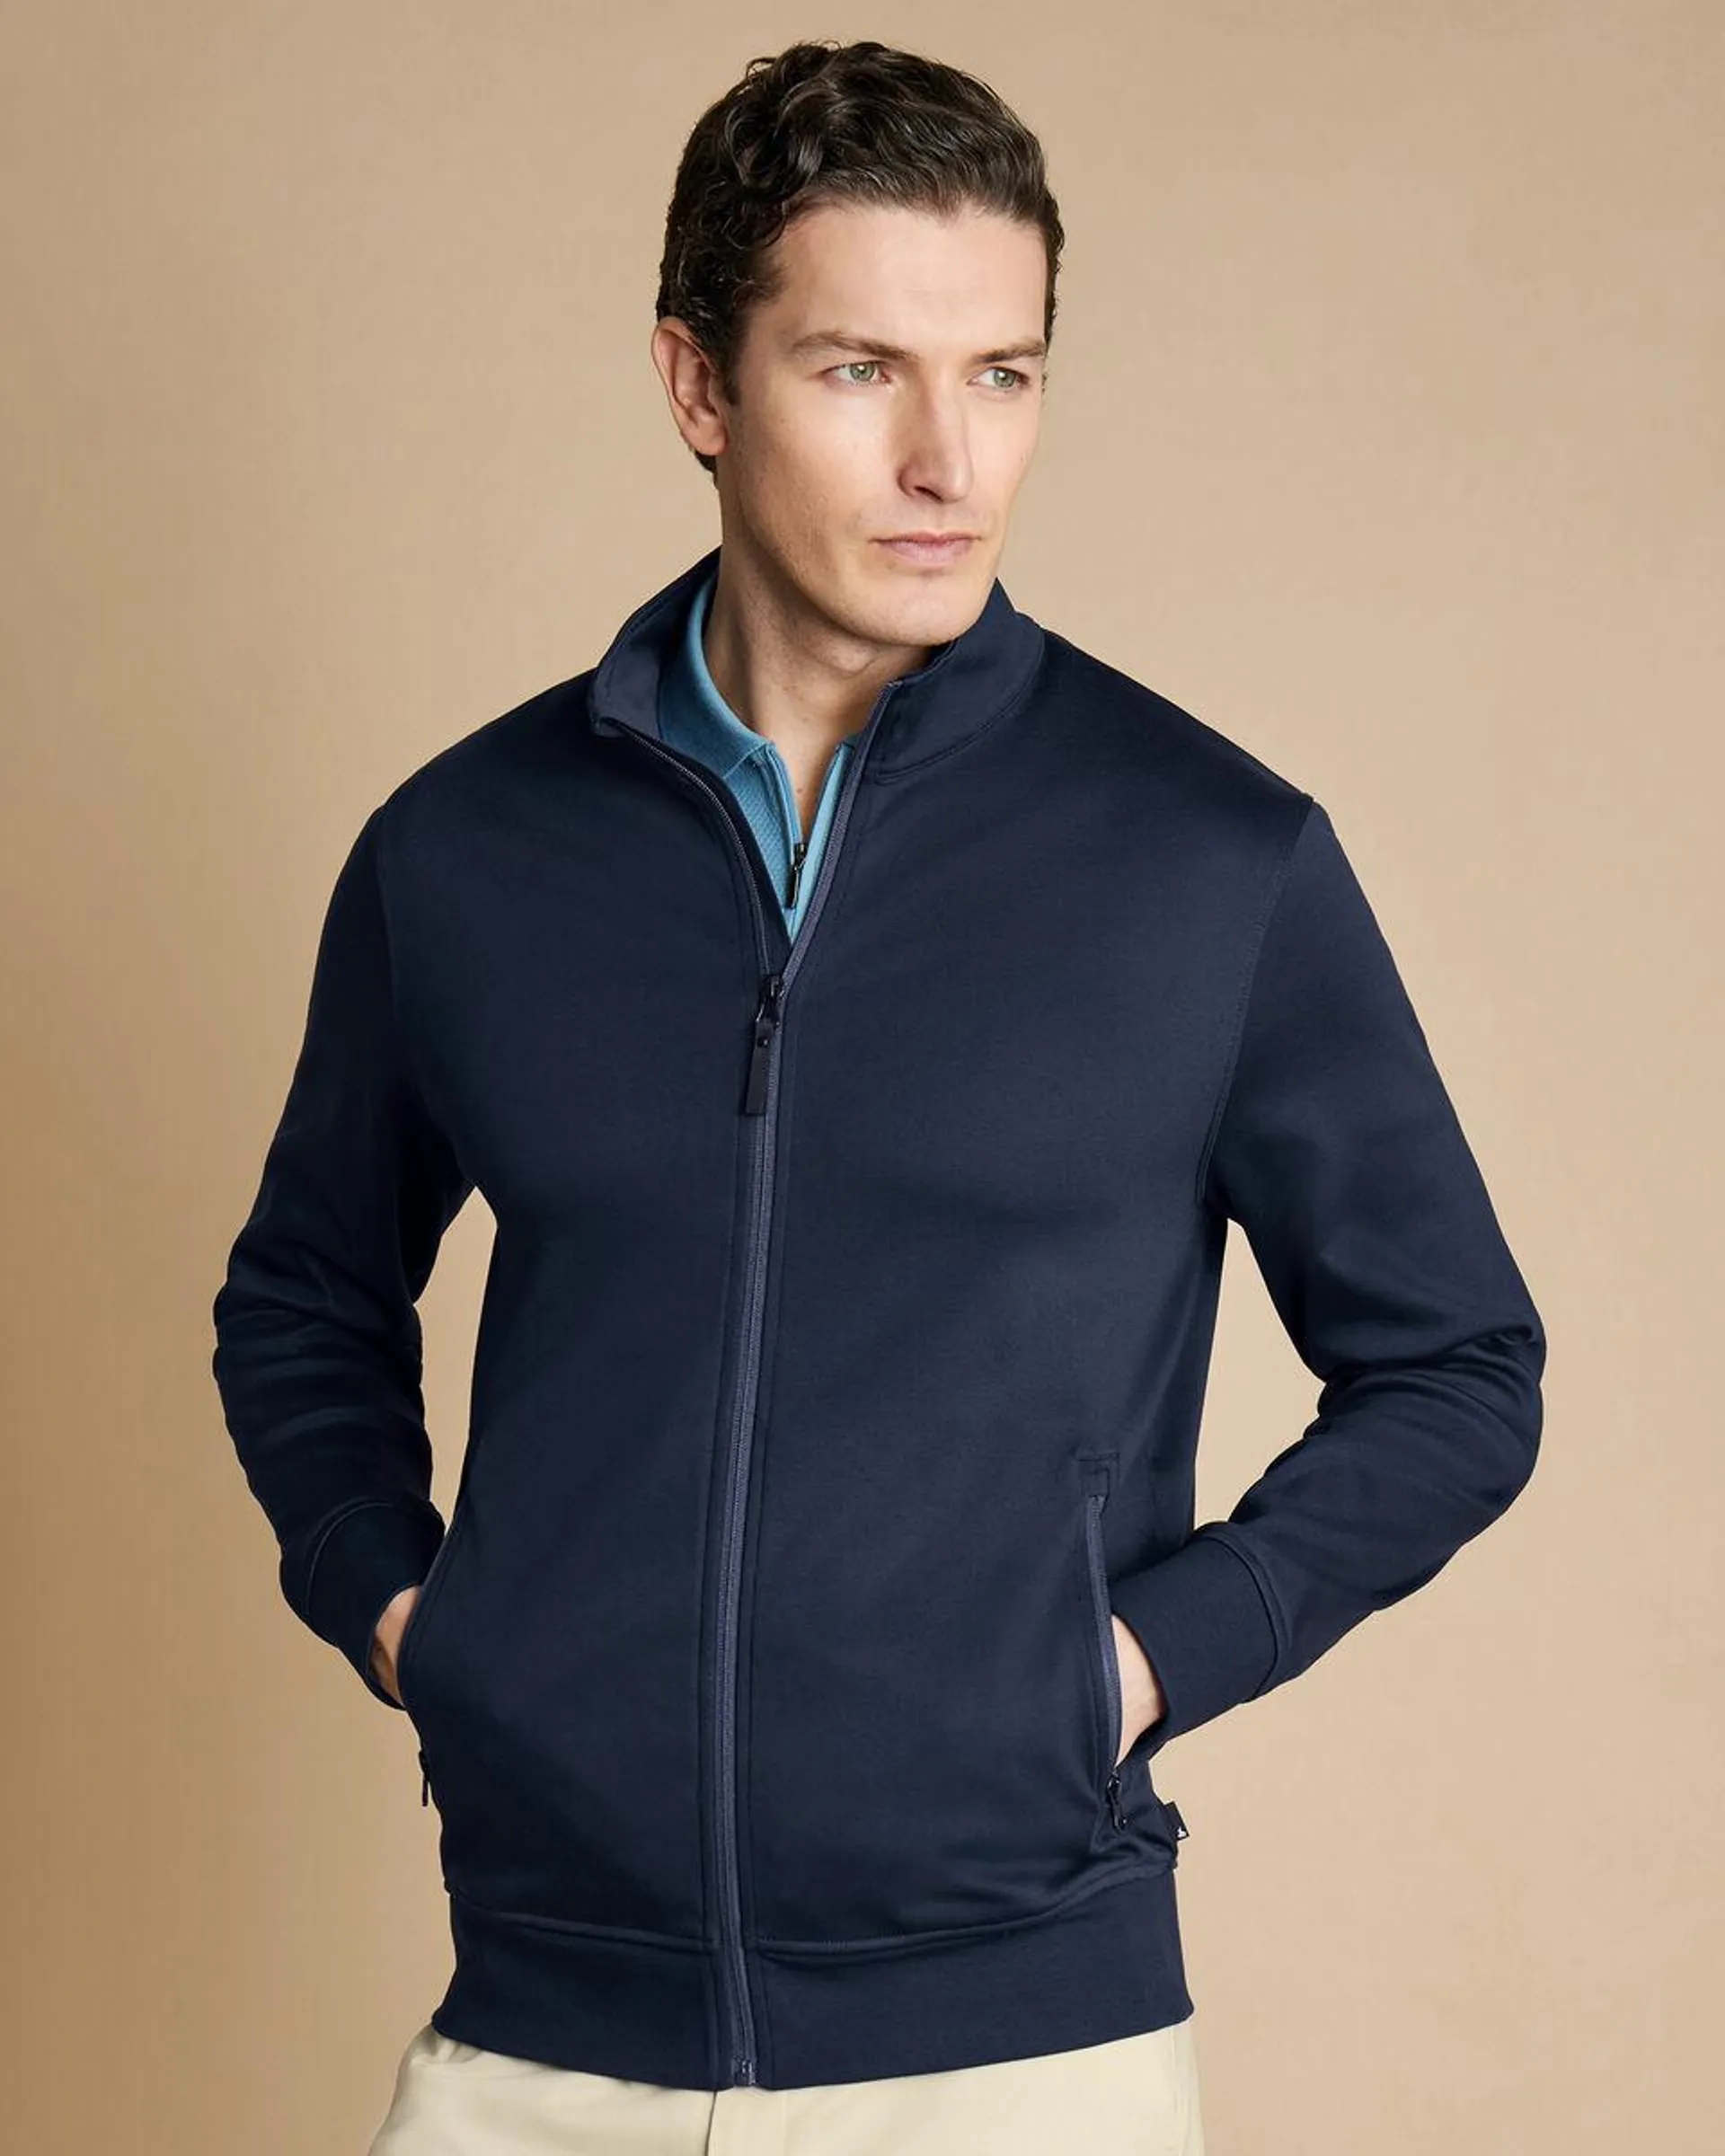 details about product: Performance Funnel Neck Jacket - Navy